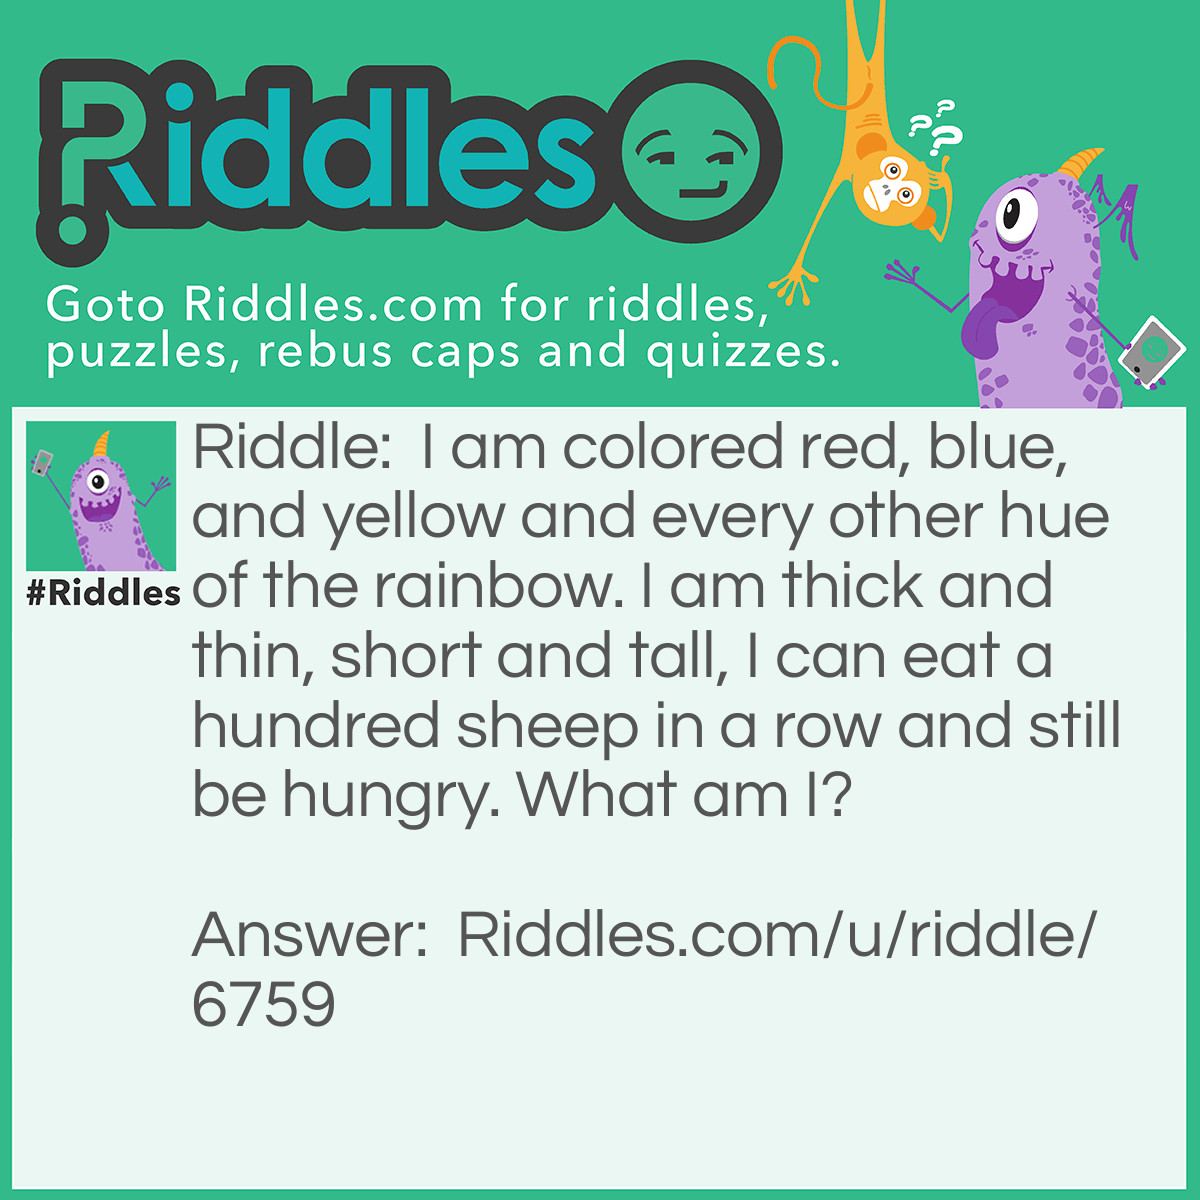 Riddle: I am colored red, blue, and yellow and every other hue of the rainbow. I am thick and thin, short and tall, I can eat a hundred sheep in a row and still be hungry. What am I? Answer: A woolen rug. (Riddle from Brisingr, Book 3 of the Inheritance Cycle).